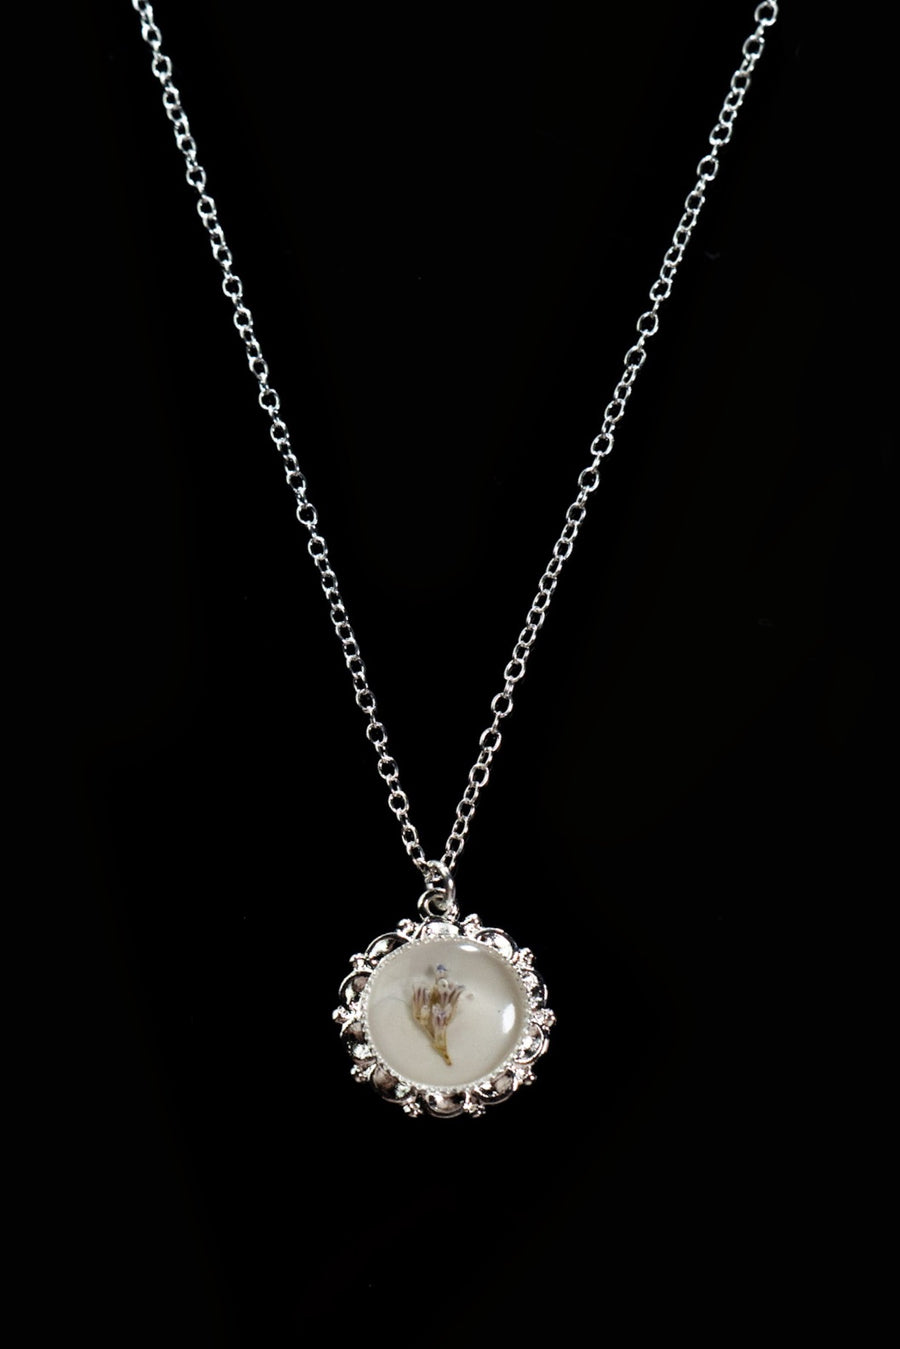 Beige/Baby's Breath Pressed Flower Long Circle Pendant Necklace SS by Lace & Pearls Jewelry